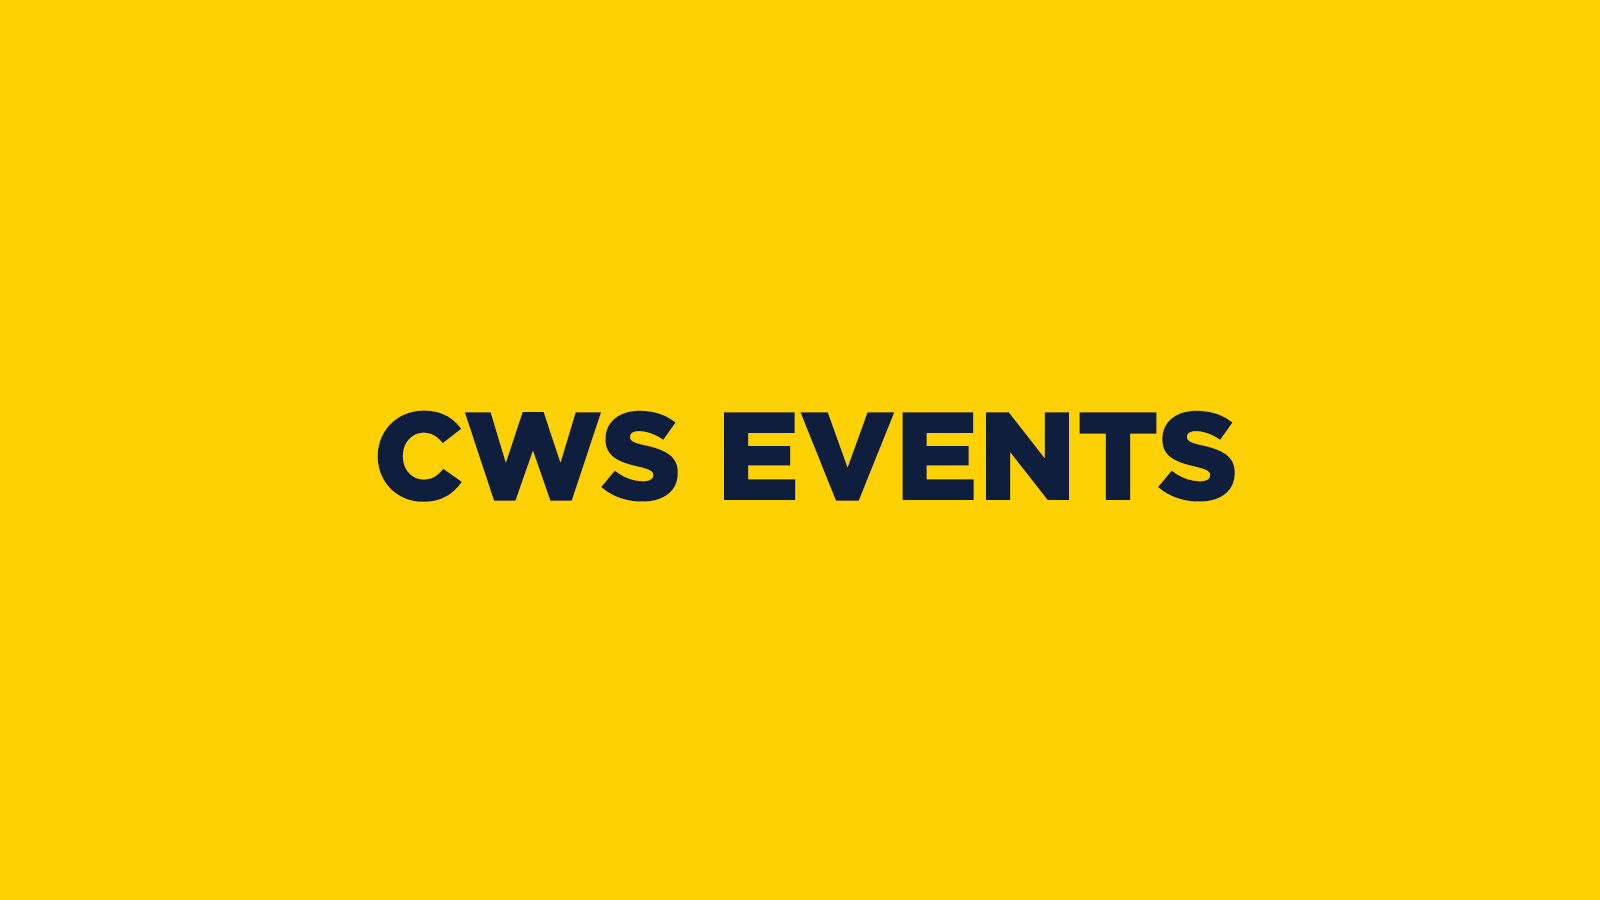 CWS EVENTS